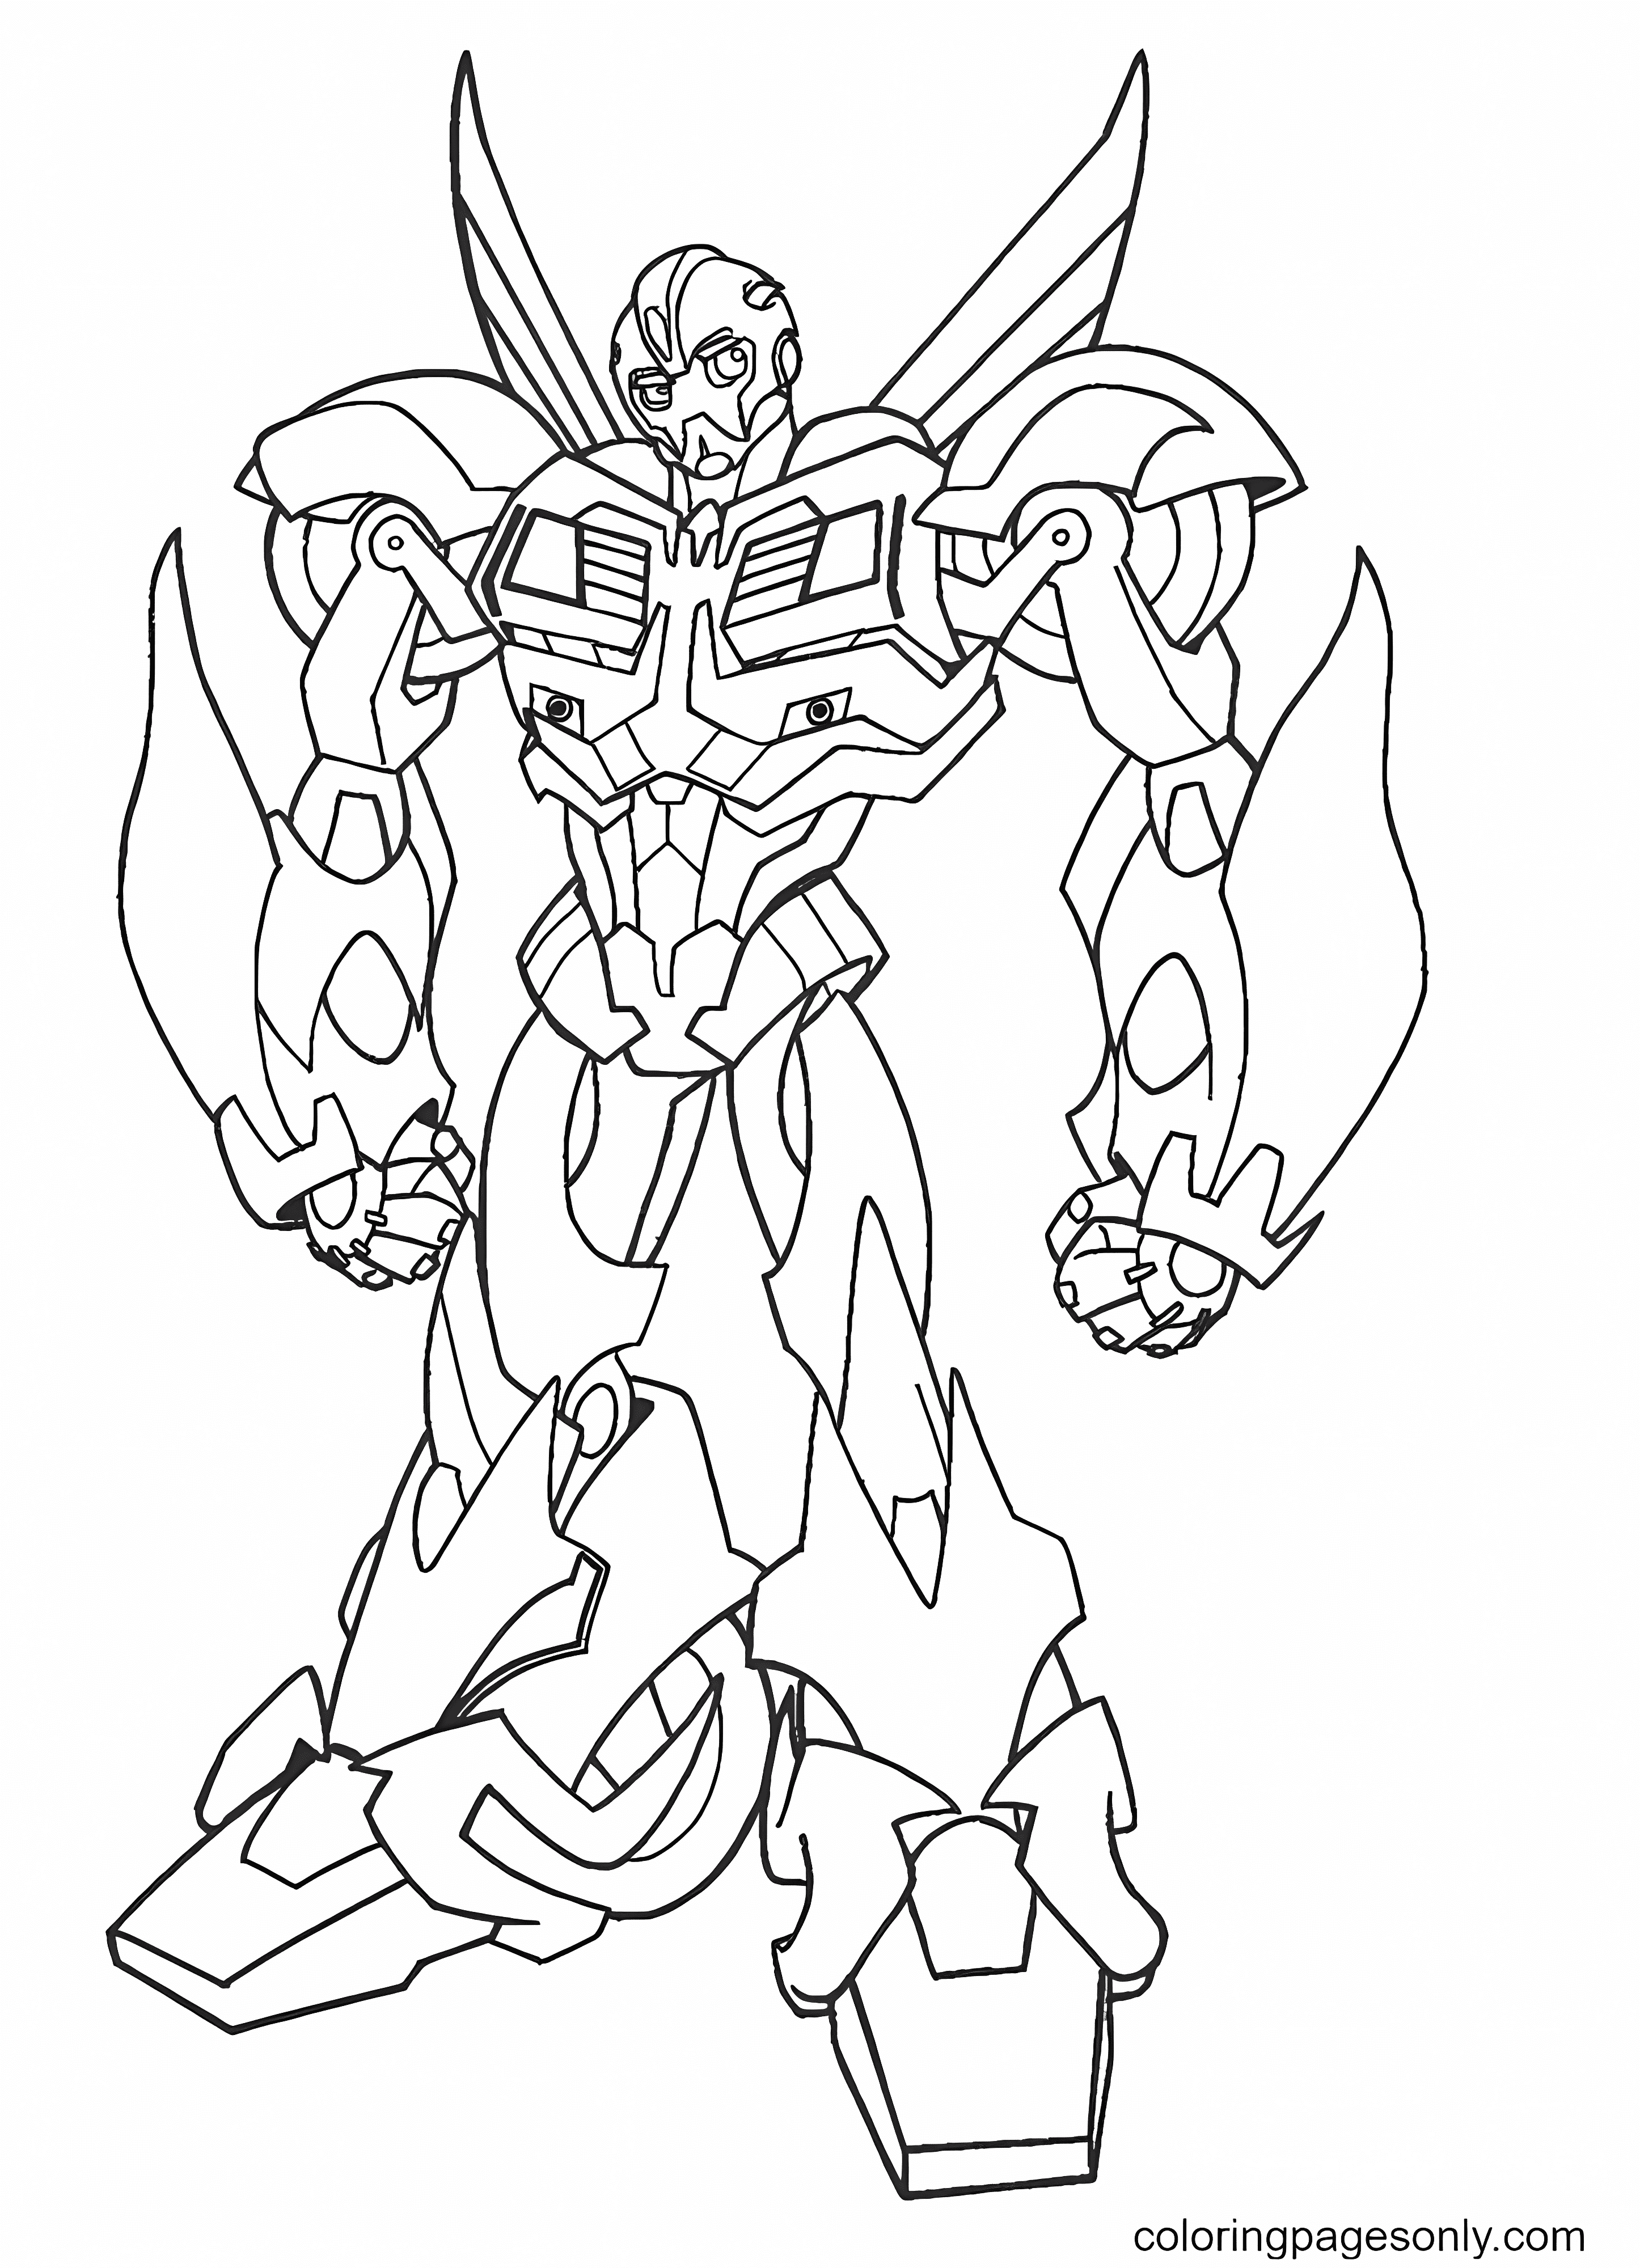 Fight of Transformers Robots Coloring Page